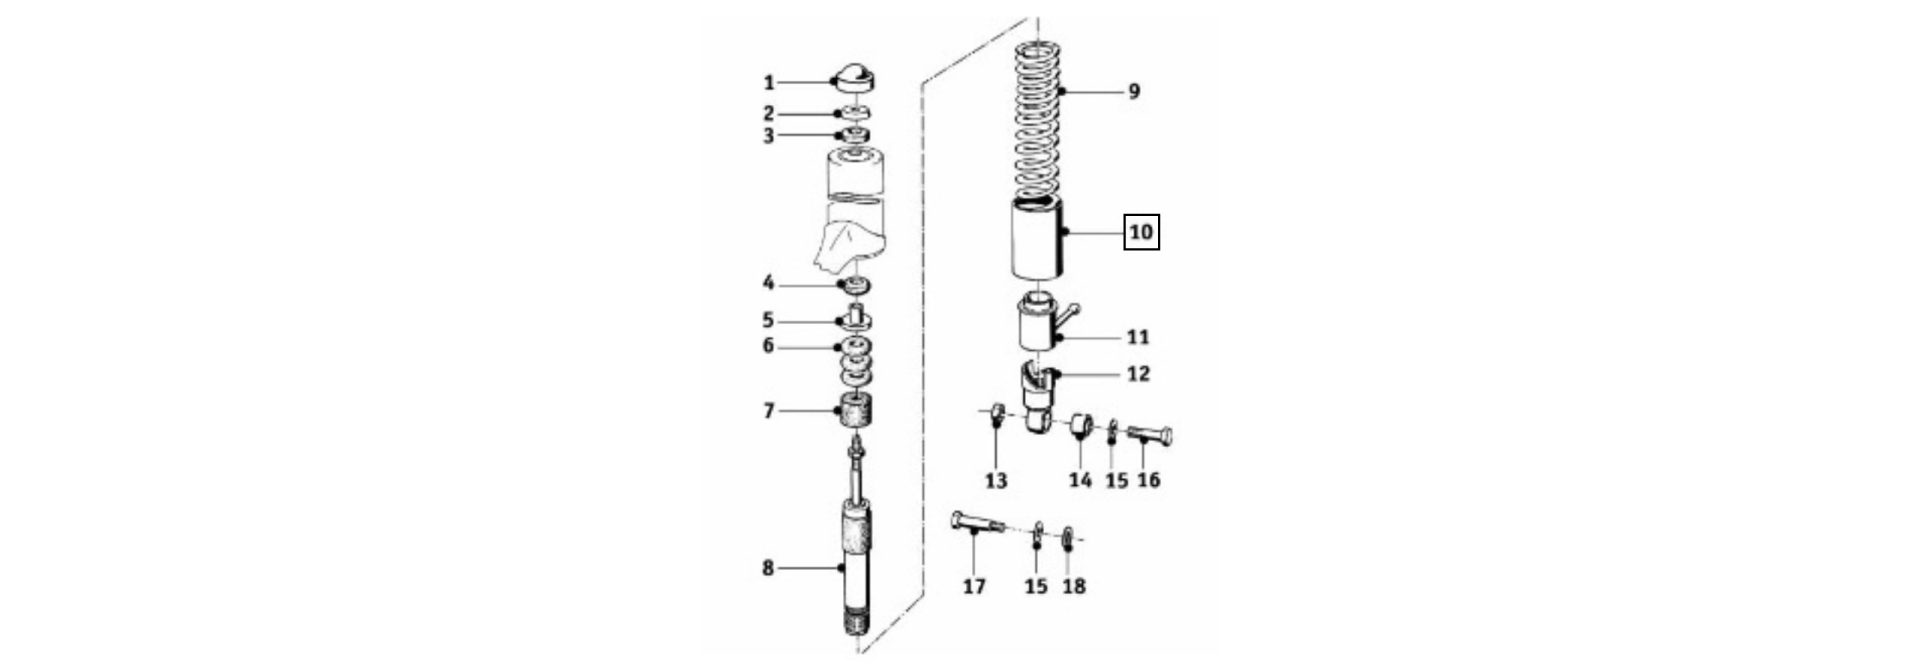 Exploded-view drawing shock absorber sleeve